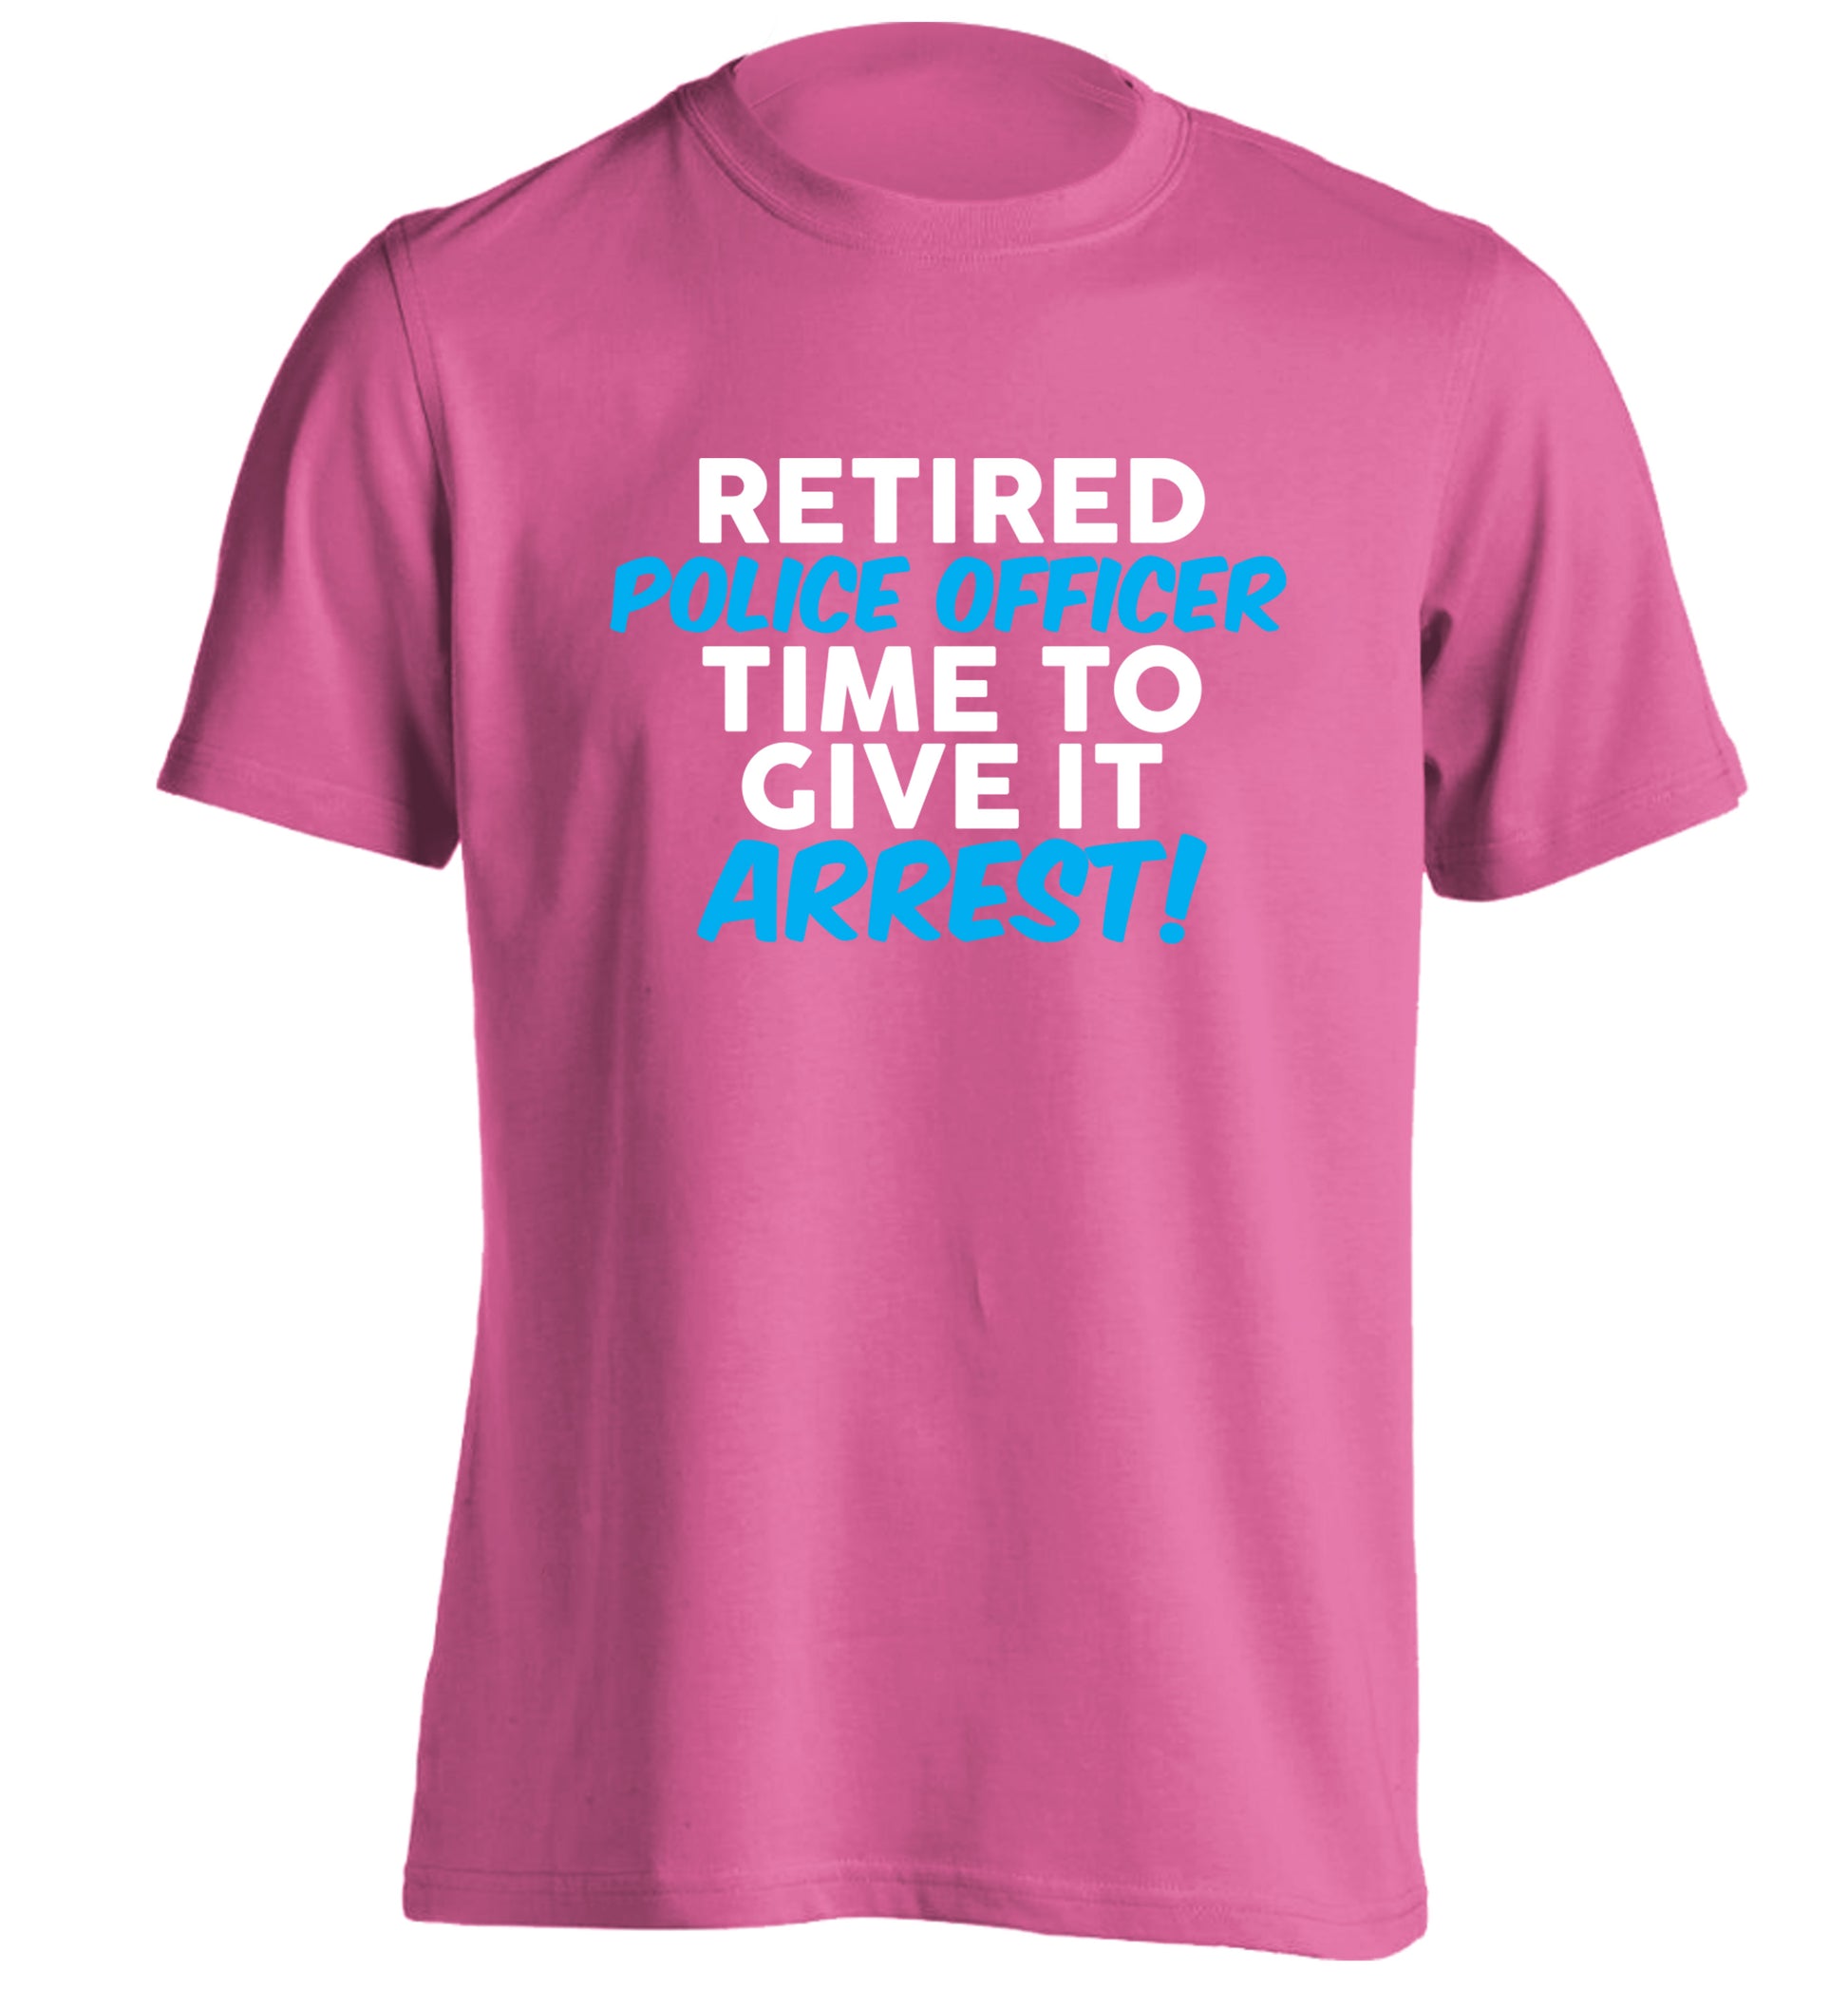 Retired police officer time to give it arrest adults unisex pink Tshirt 2XL